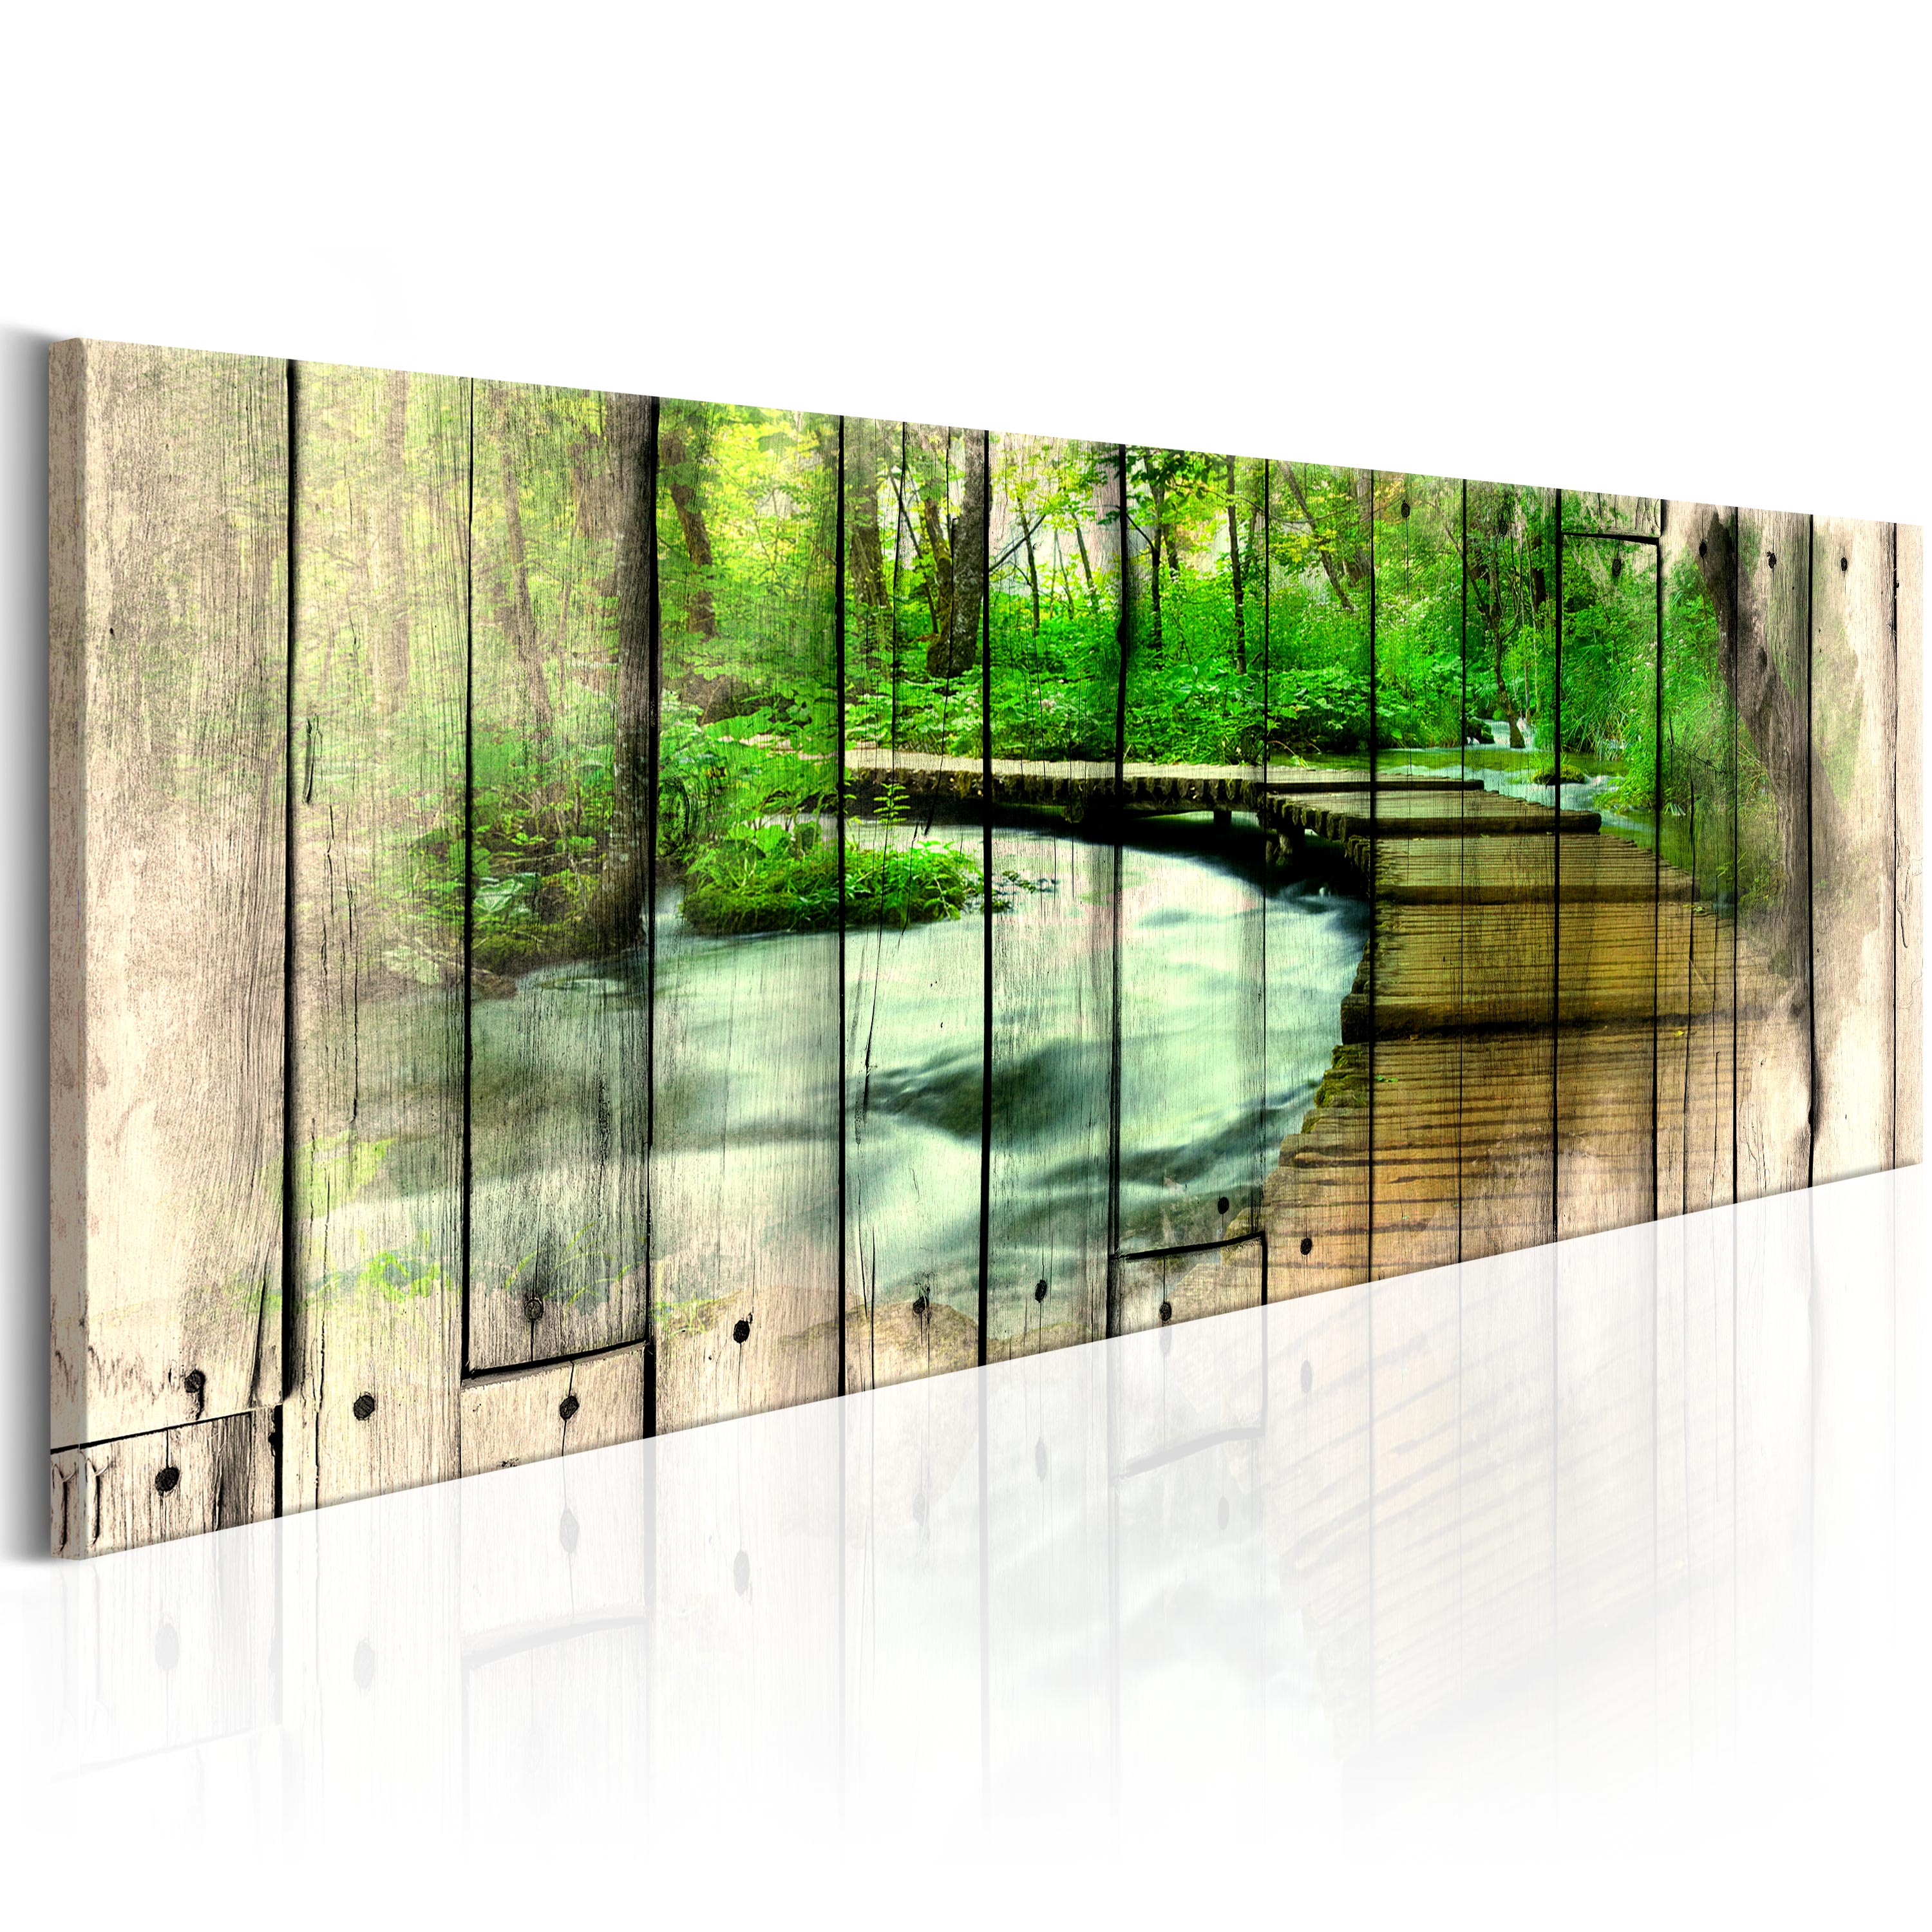 Canvas Print - Forestry Memories - 135x45